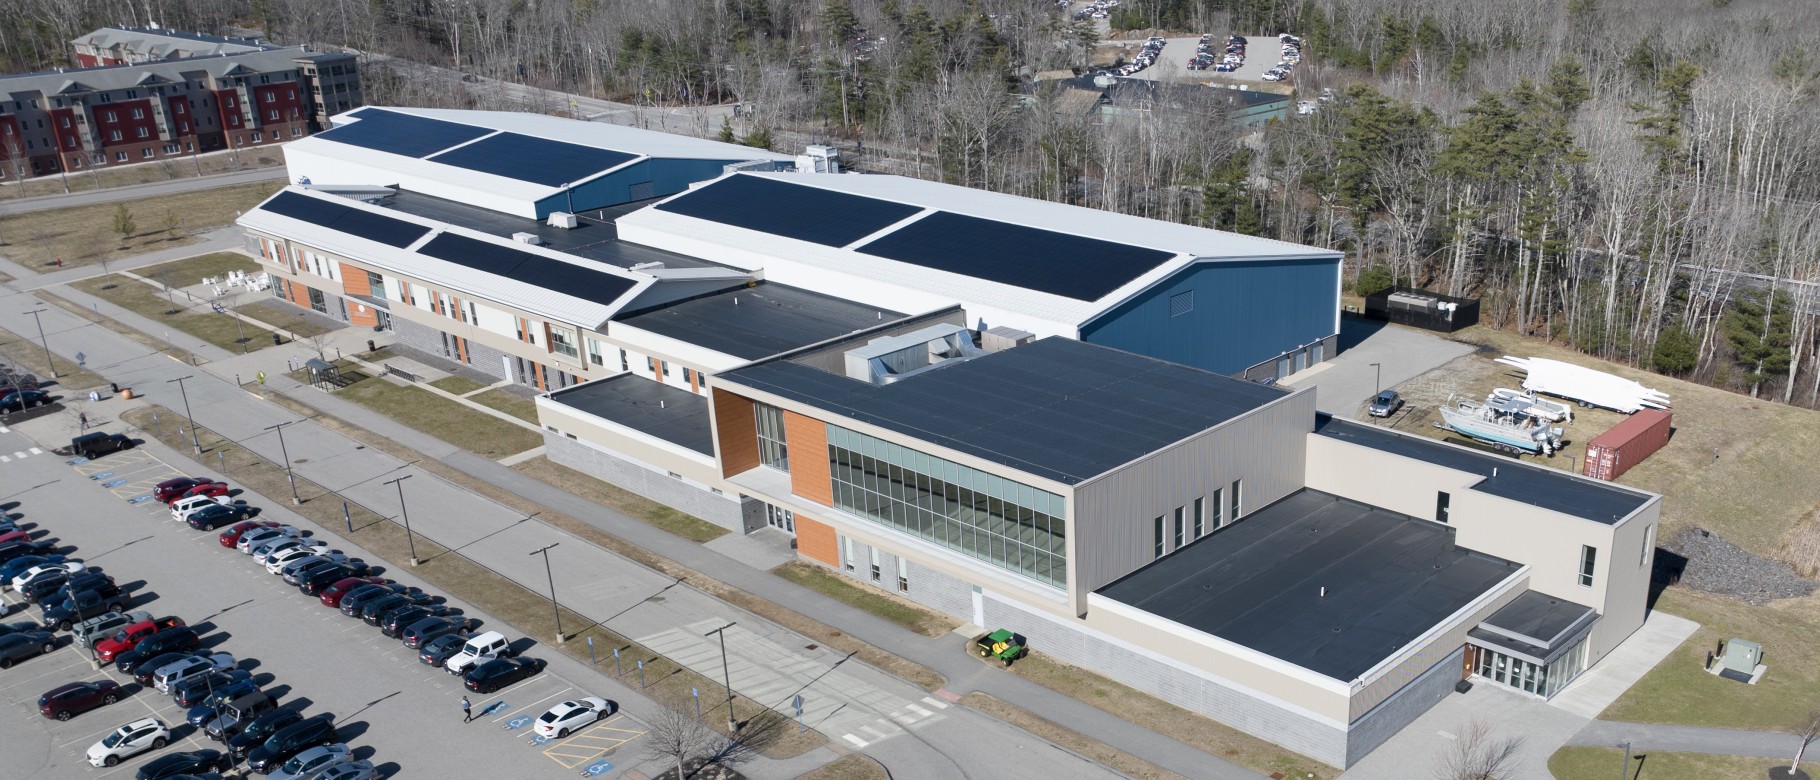 Aerial image of solar panels atop the Harold Alfond Forum